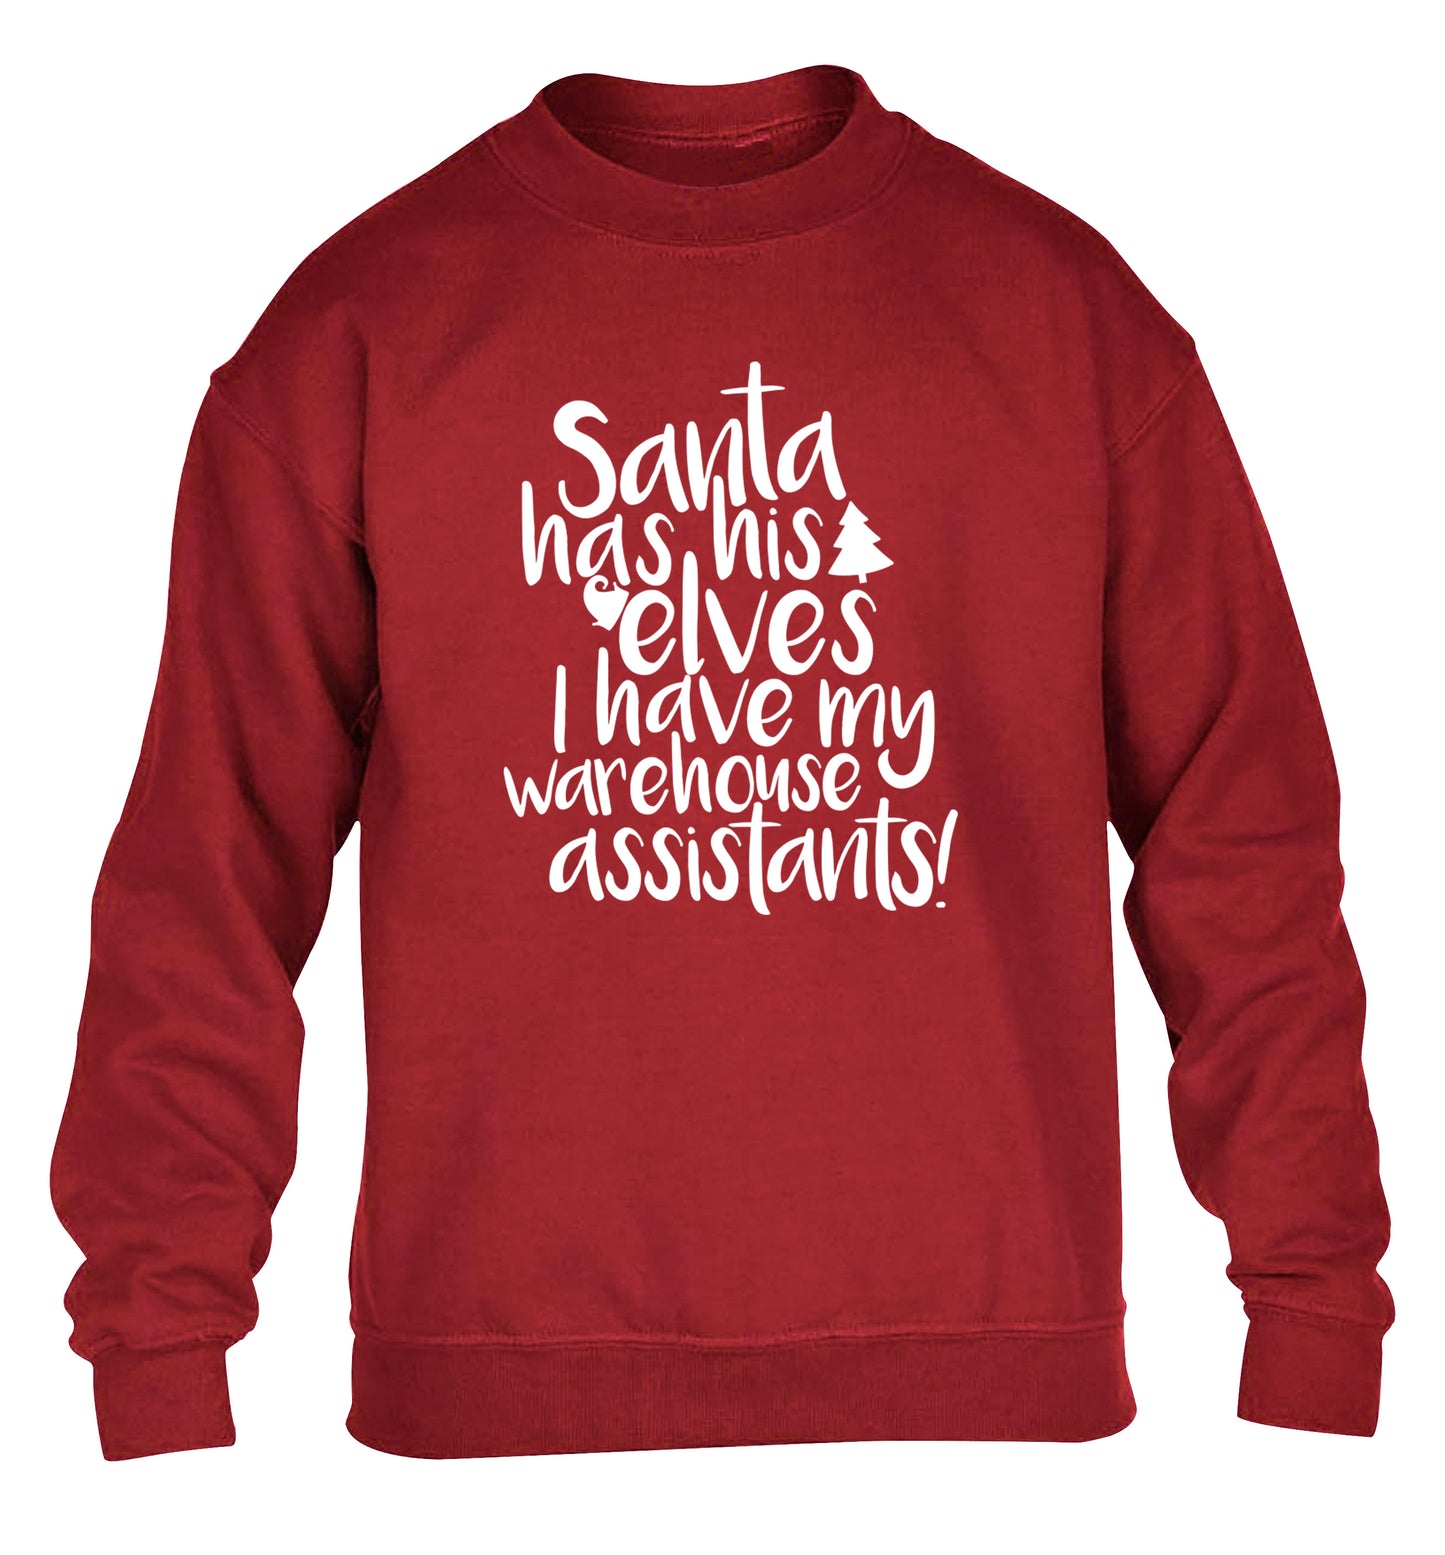 Santa has his elves I have my warehouse assistants children's grey sweater 12-14 Years